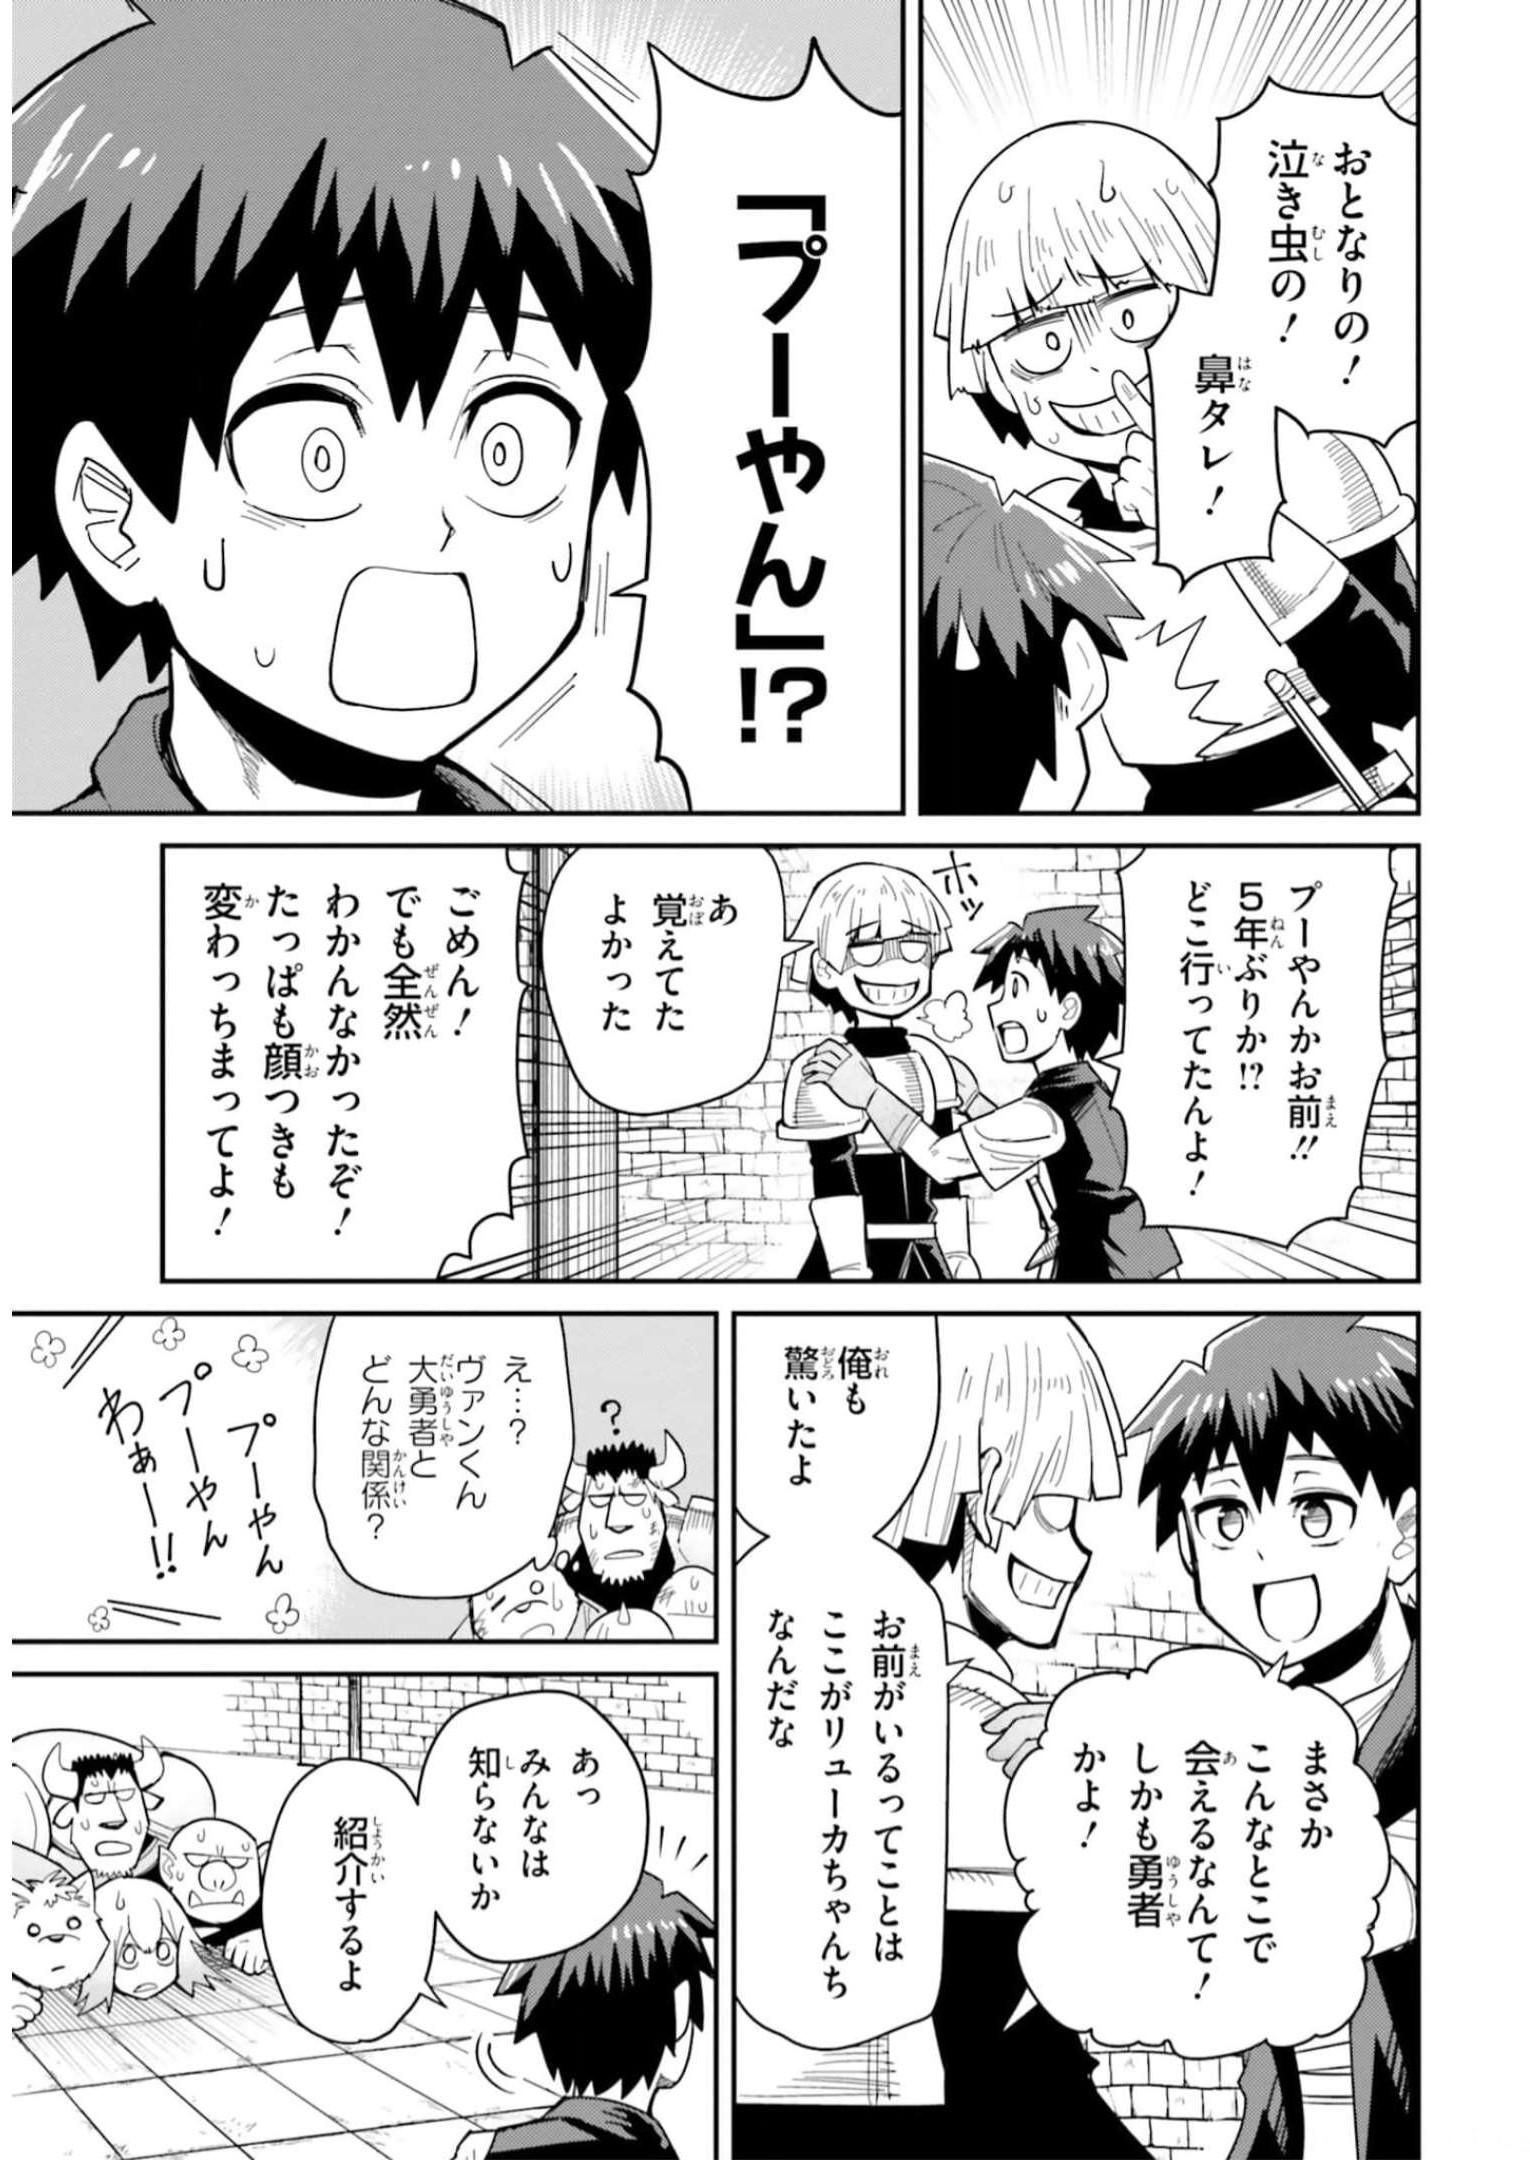 Dungeon Friends Forever Dungeon's Childhood Friend ダンジョンの幼なじみ 第27話 - Page 16